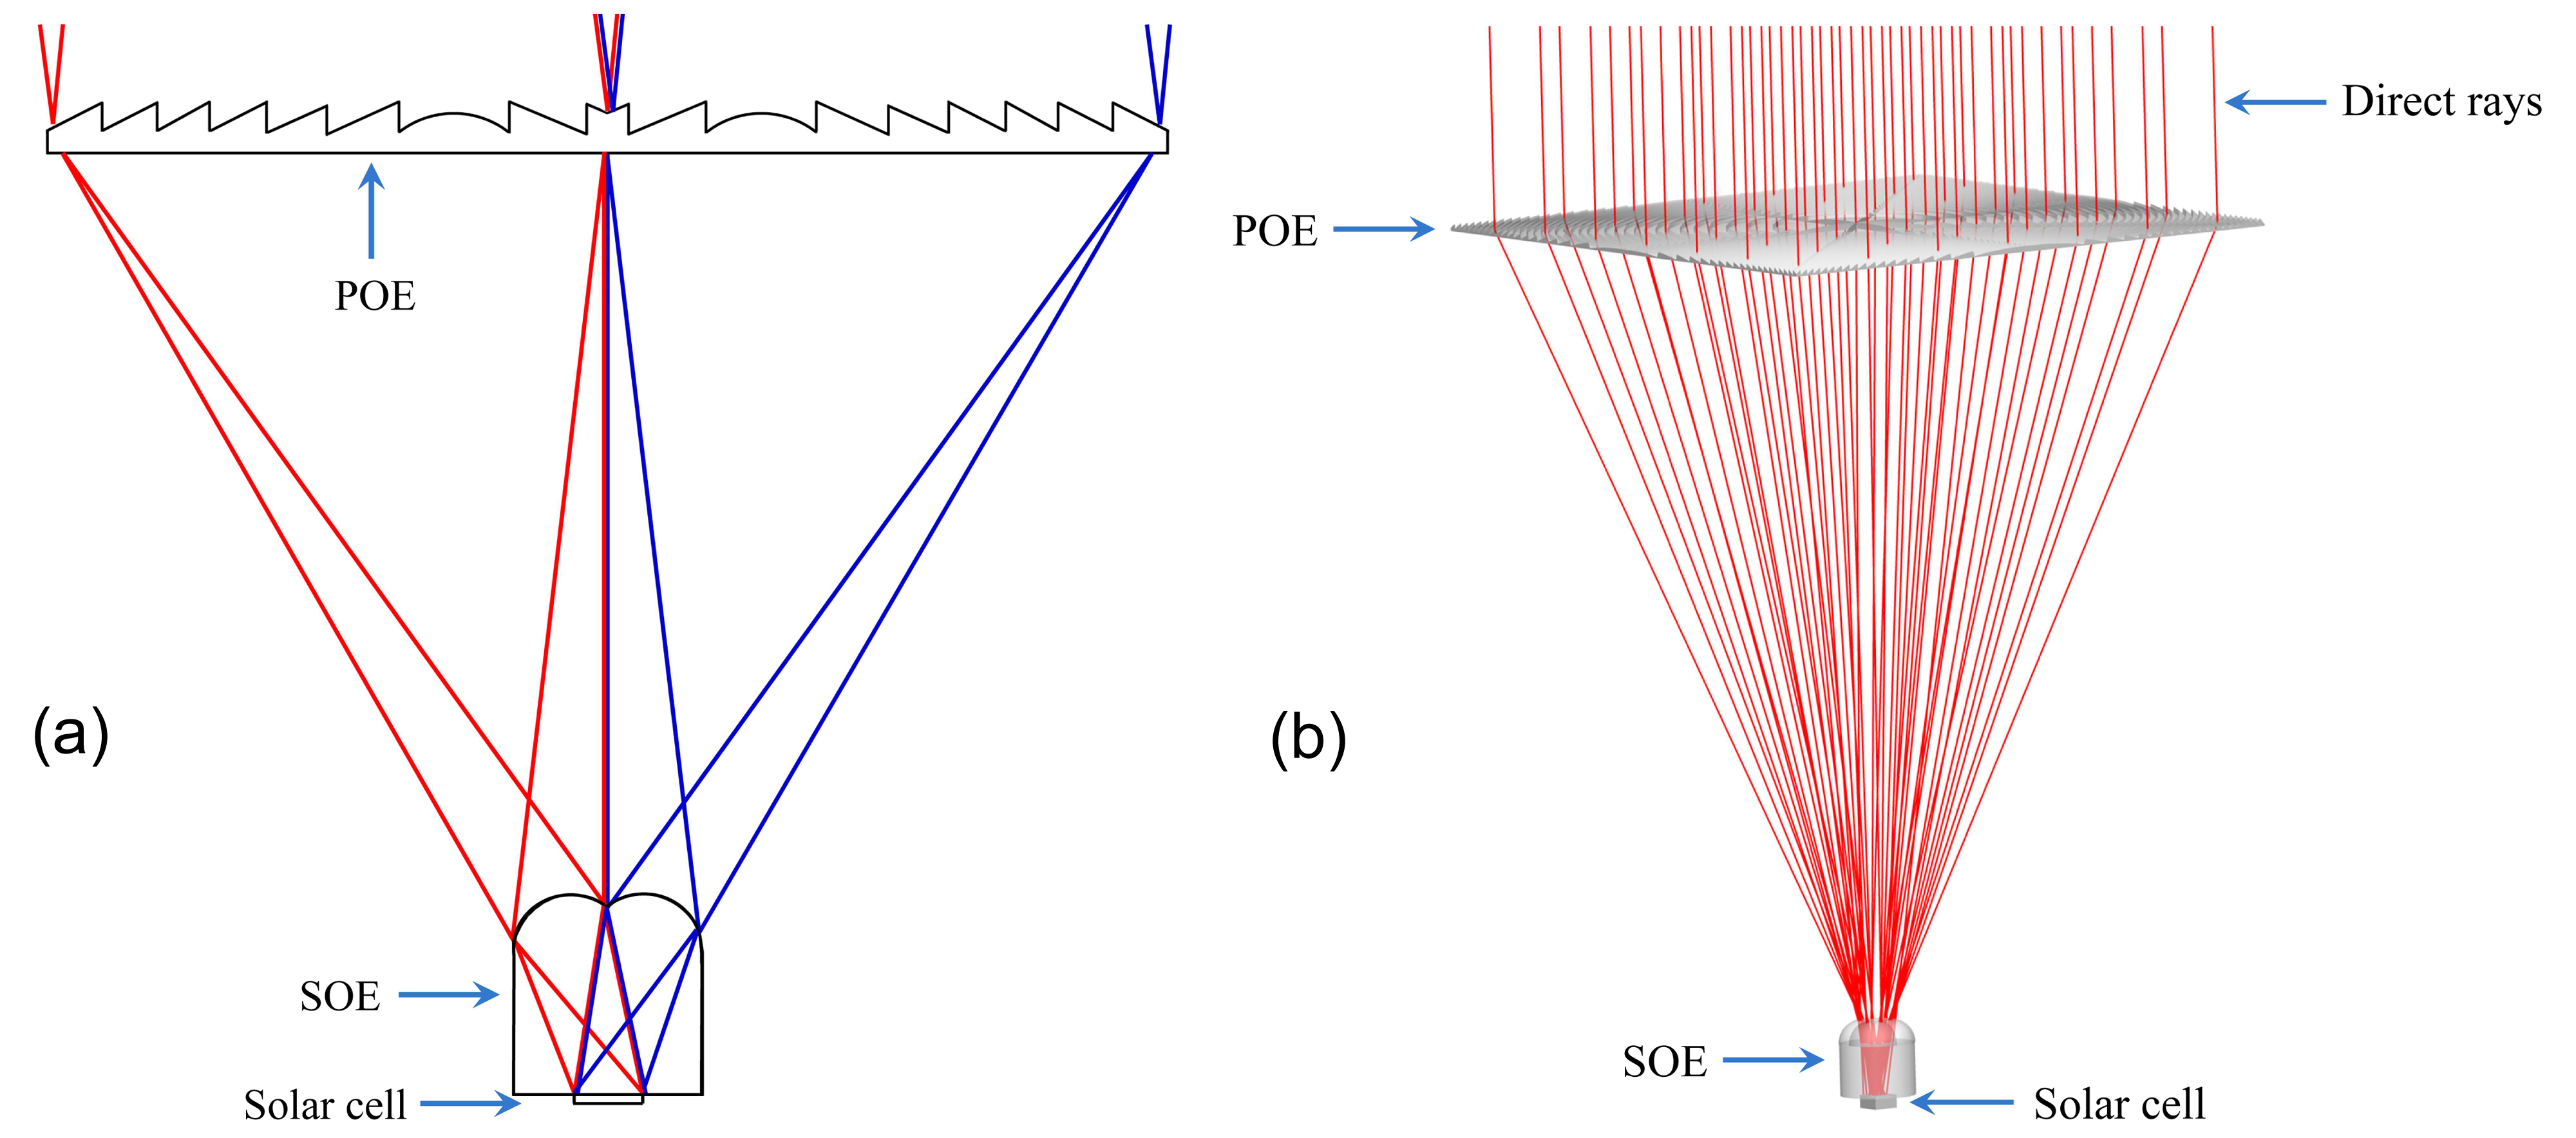 (a) Schematic showing edge-ray mapping in an ideal Fresnel concentrator. (b) Layout of the eight-fold Fresnel-based CPV system with ray-tracing sowing how rays uniformly illuminated the cell.